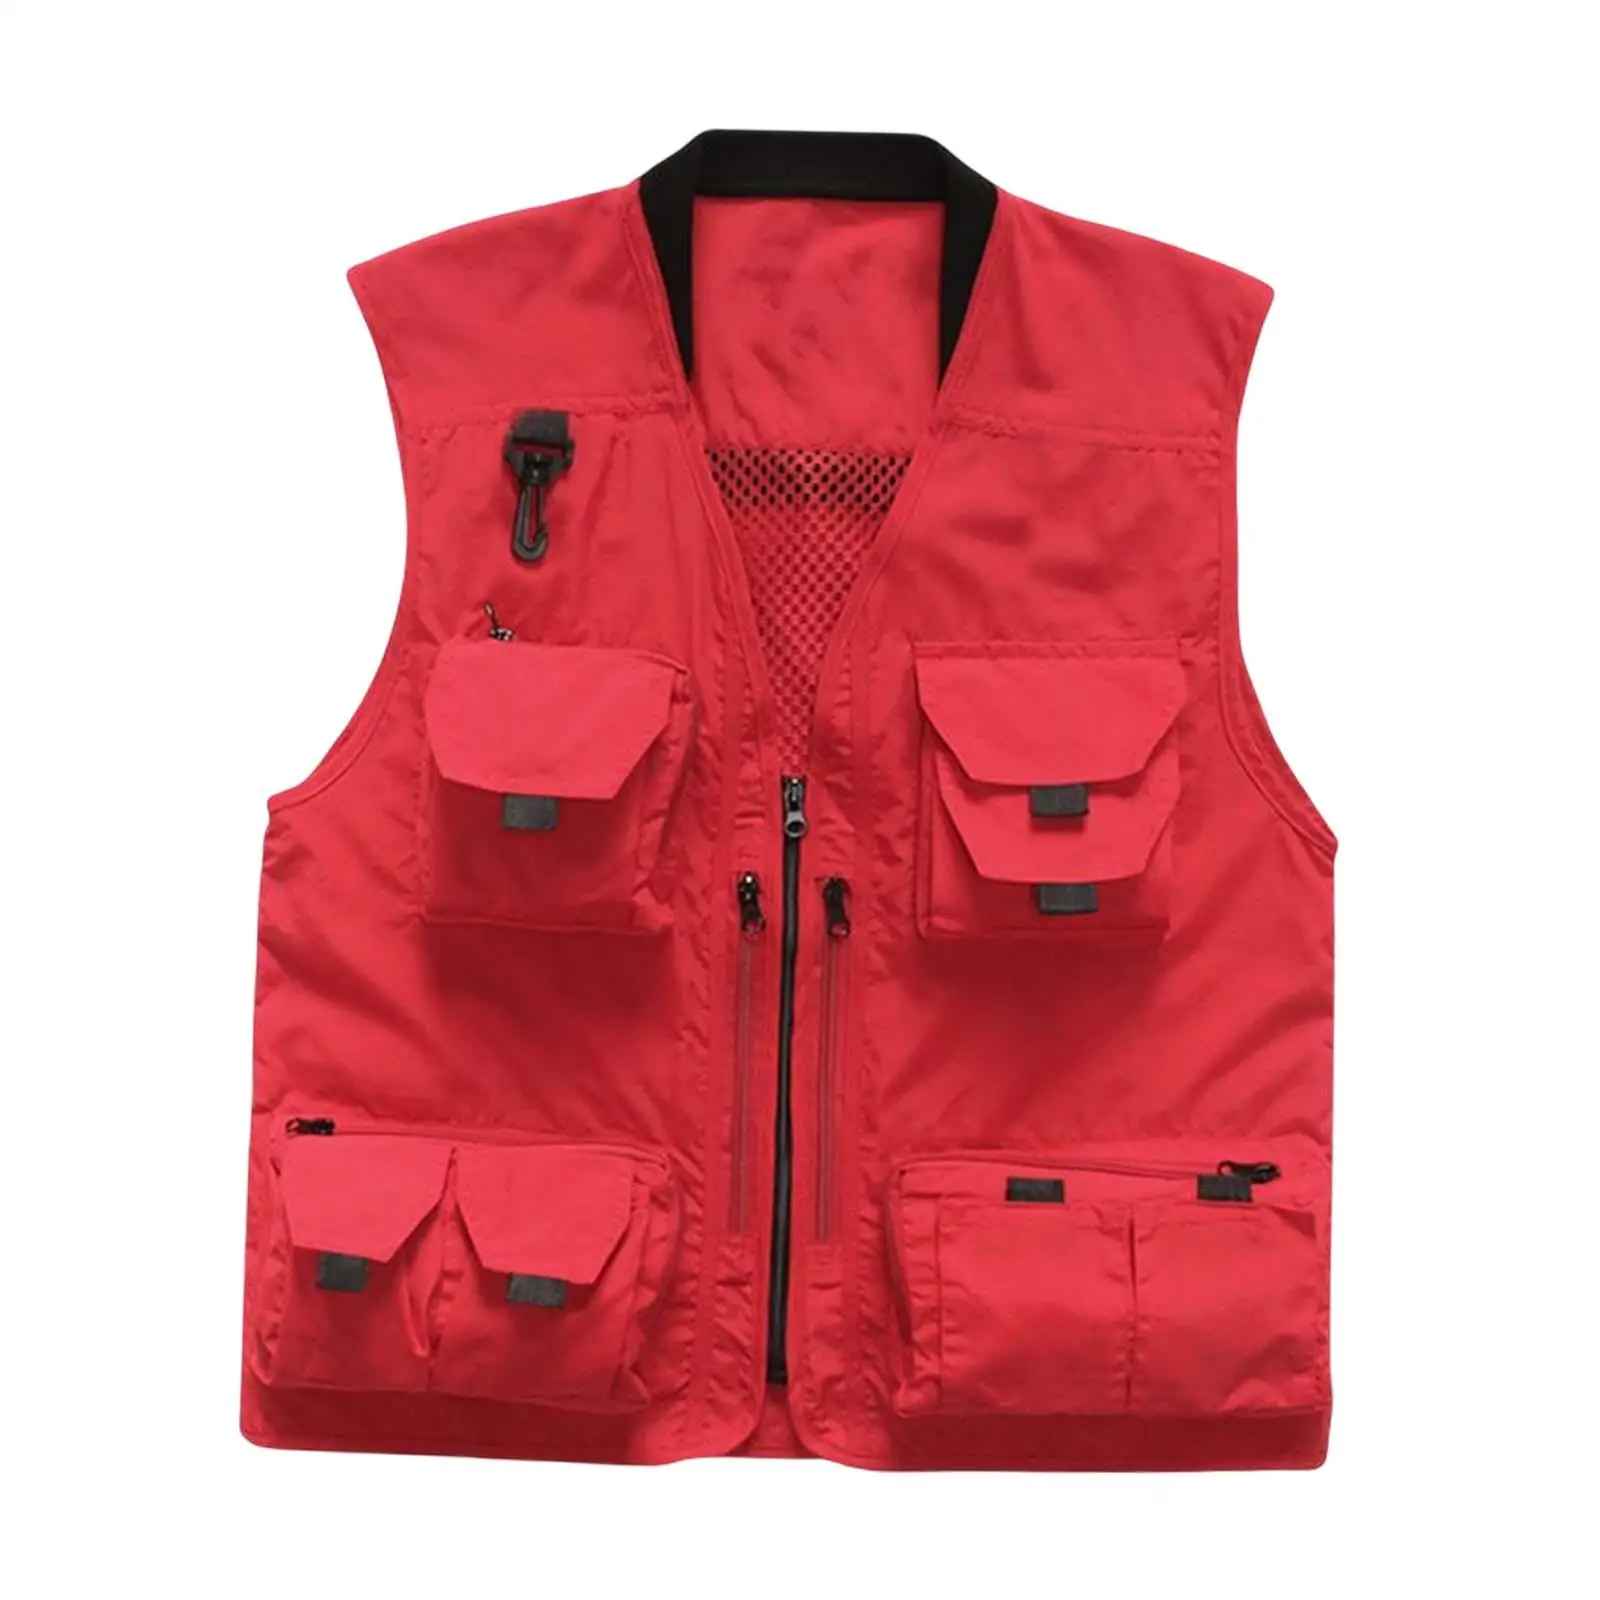 Mens Fishing Vest with Pockets Clothing Modern Jacket for Camping Travel Work Sports